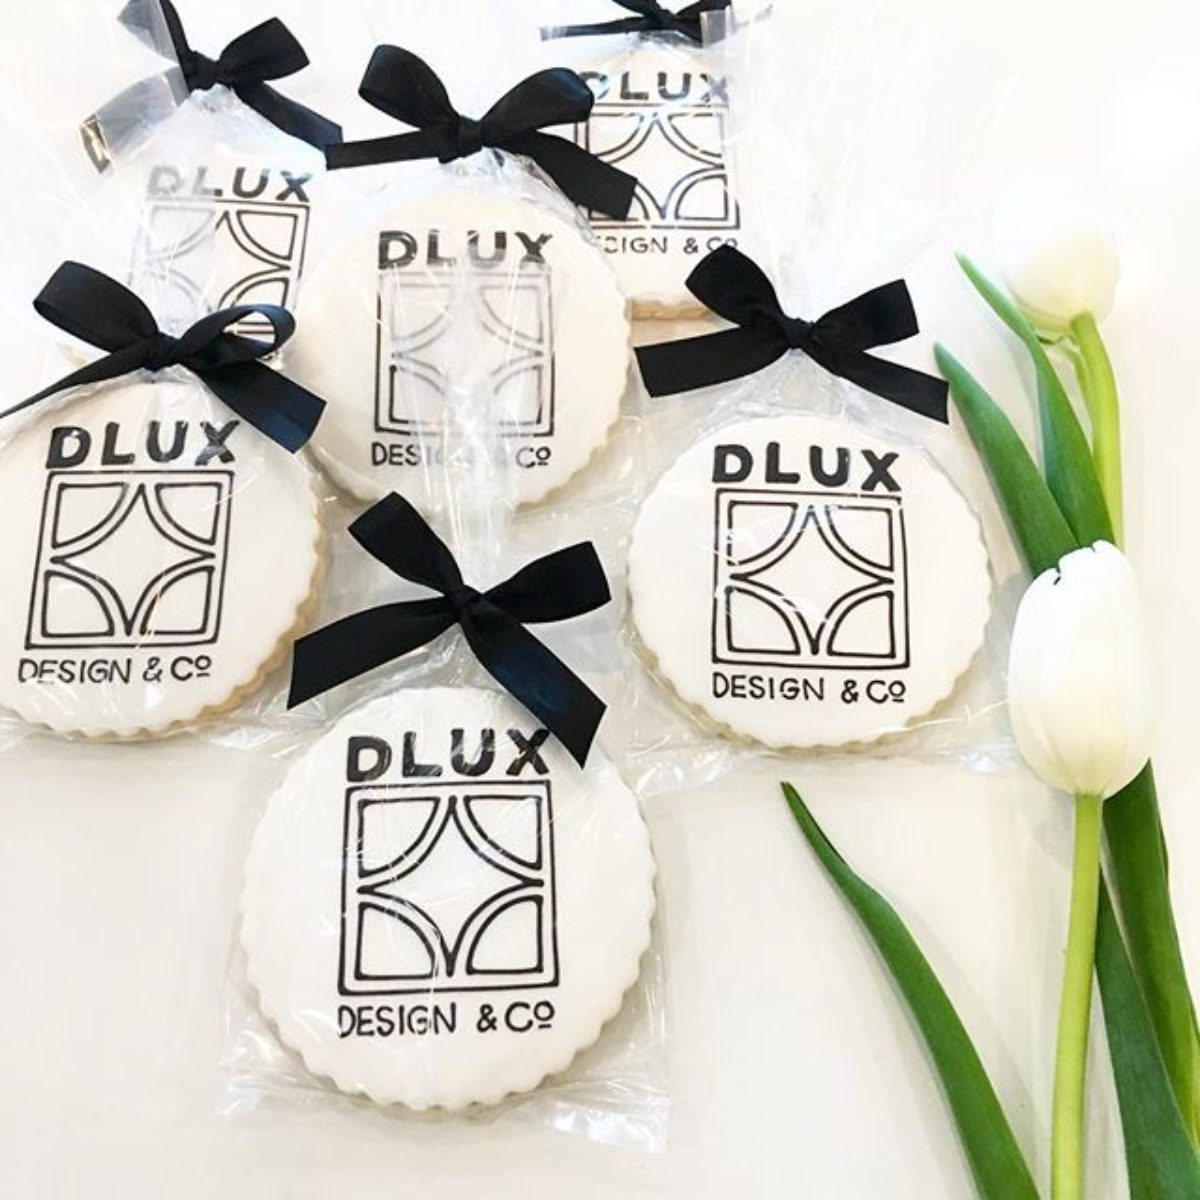 Logo Decorated Cookies